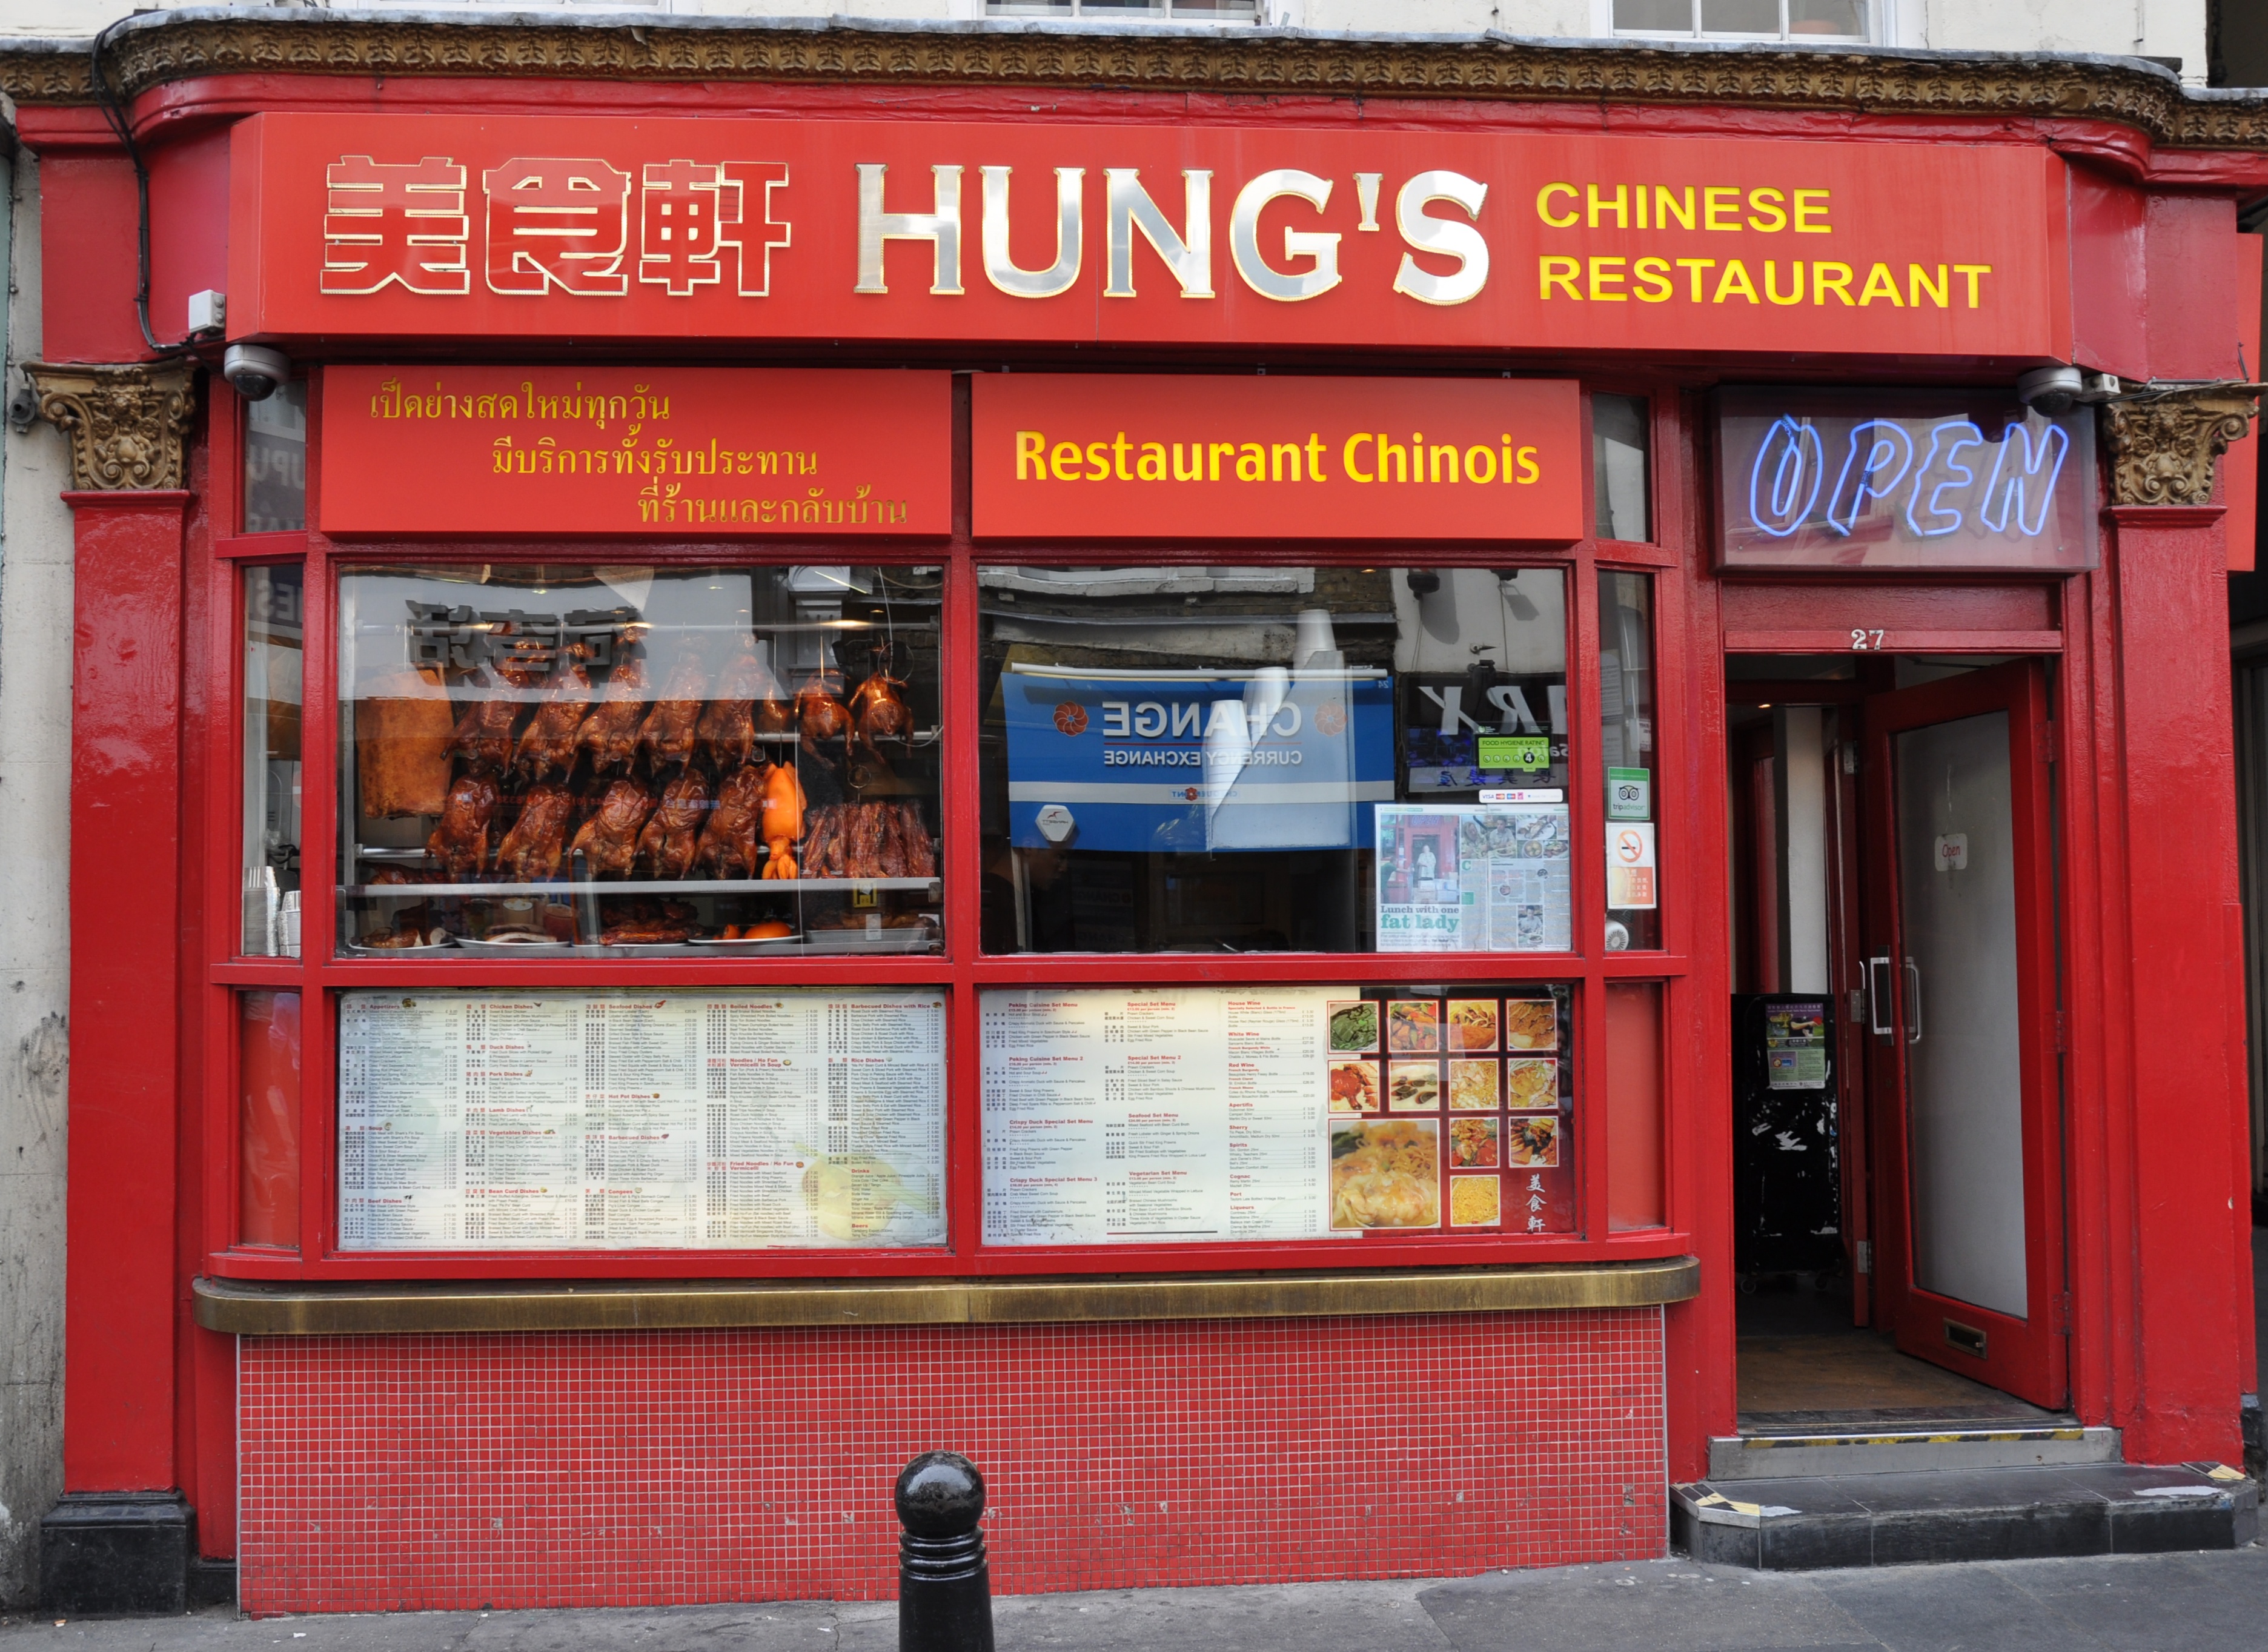 The exterior of Hung’s restaurant on Wardour Street, Chinatown, London, painted red with roast ducks in the window